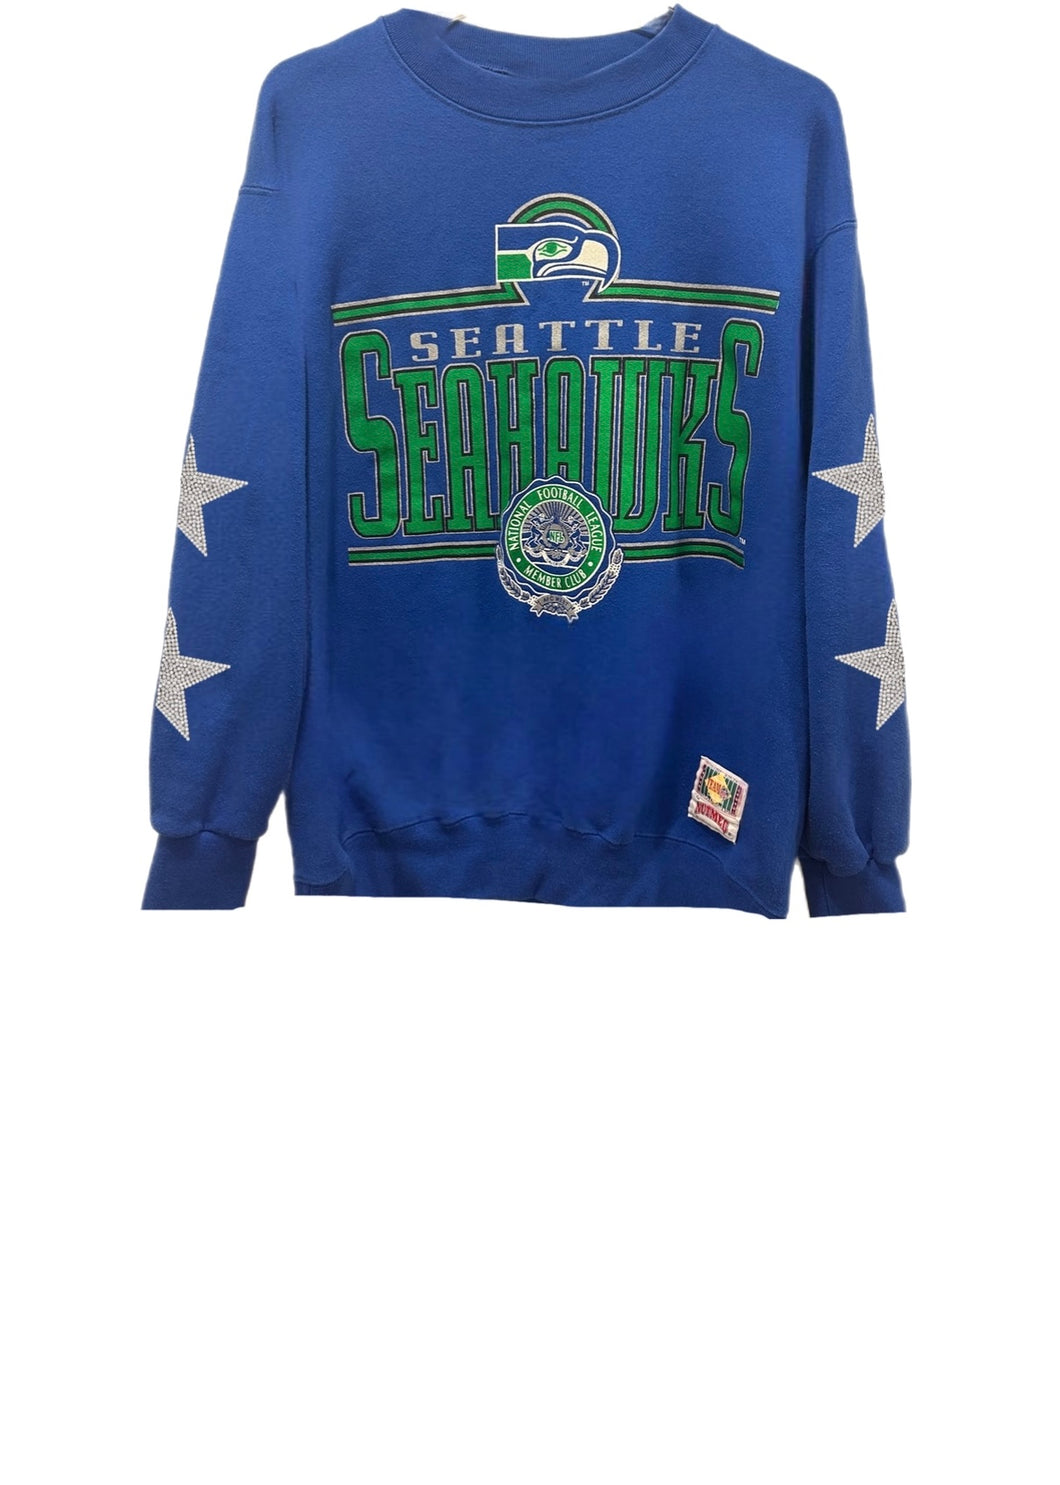 Seattle Seahawks, NFL One of a KIND Vintage Sweatshirt with Crystal Star Design